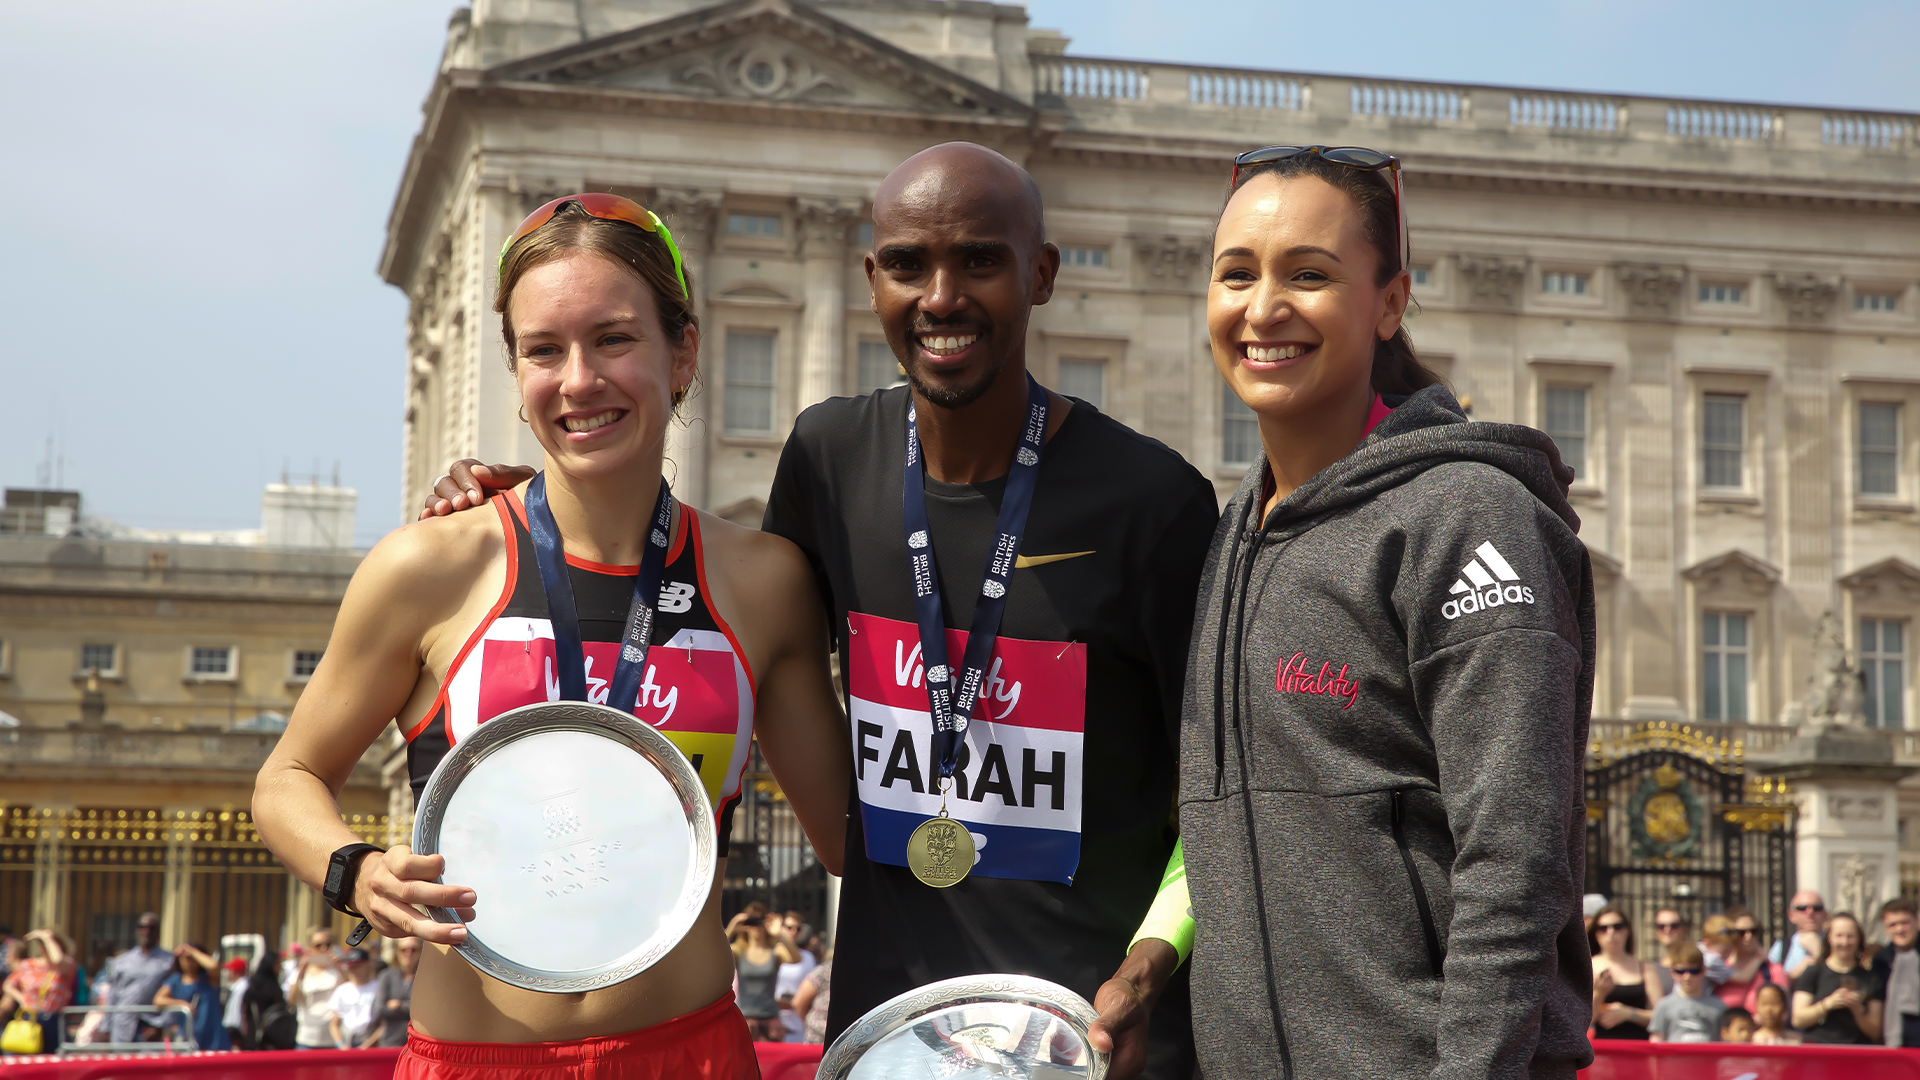 Jessica Ennis and Mo Farah with sports star